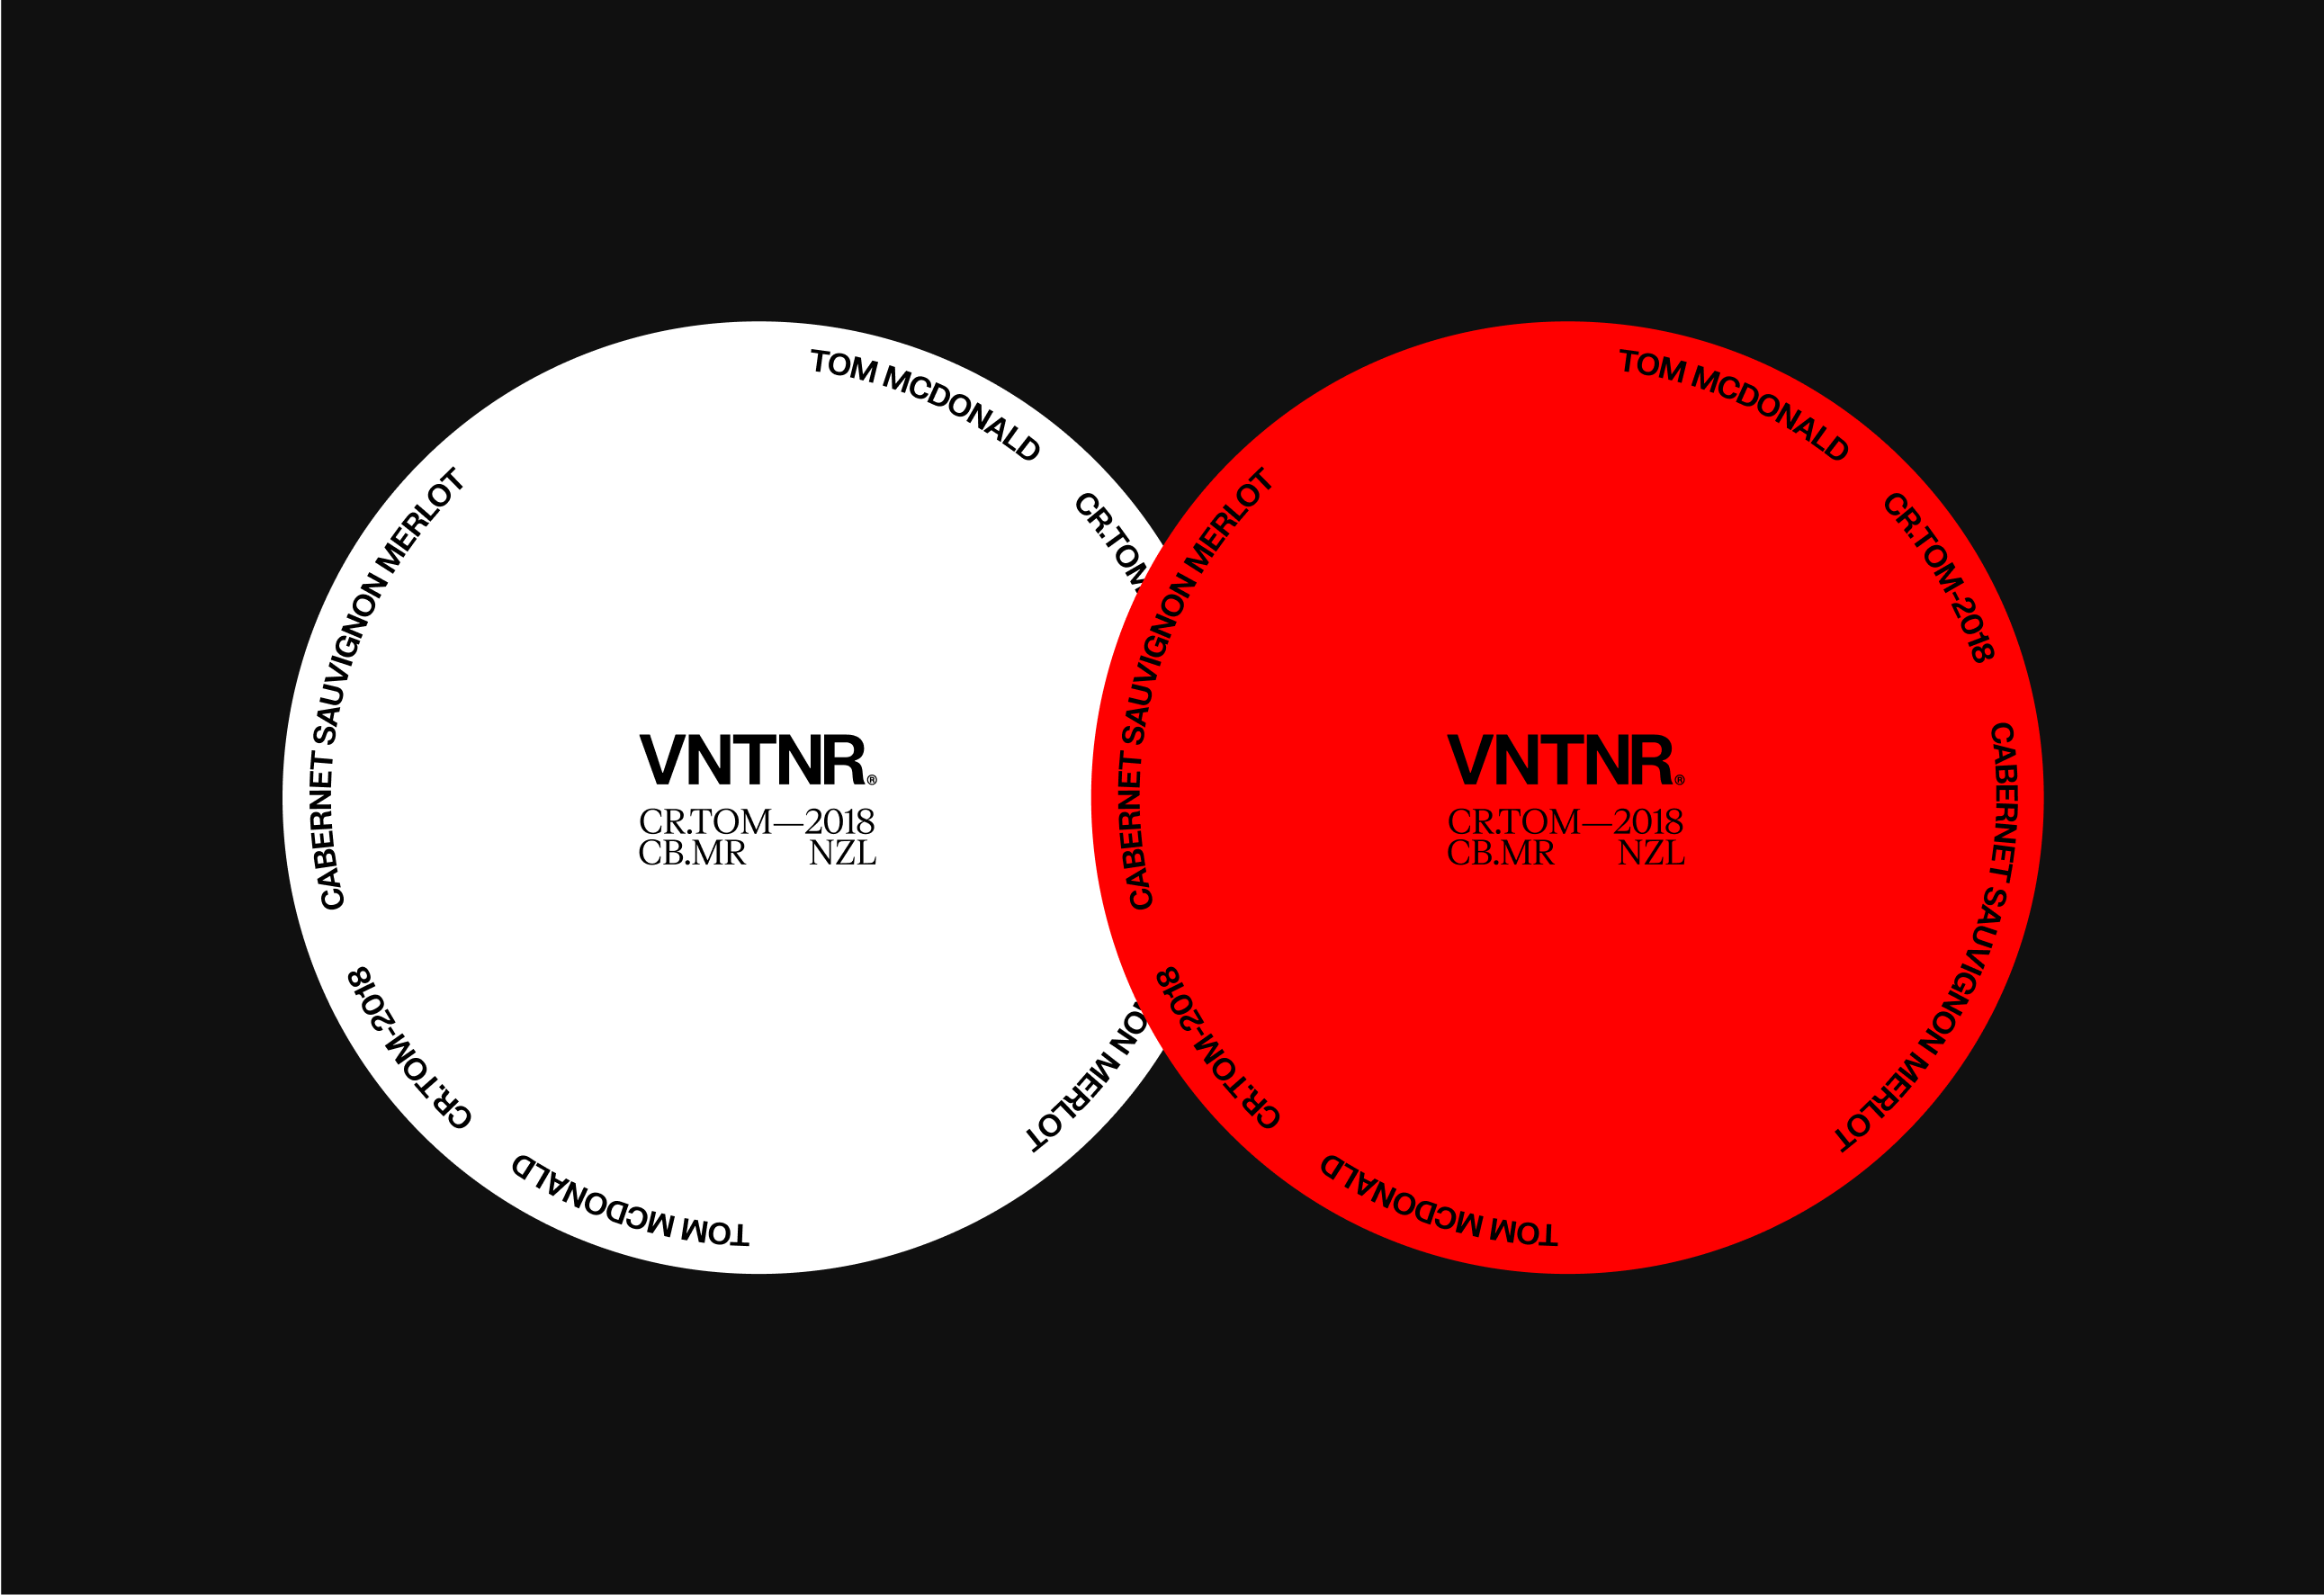 VNTNR branded coasters, one white and one red